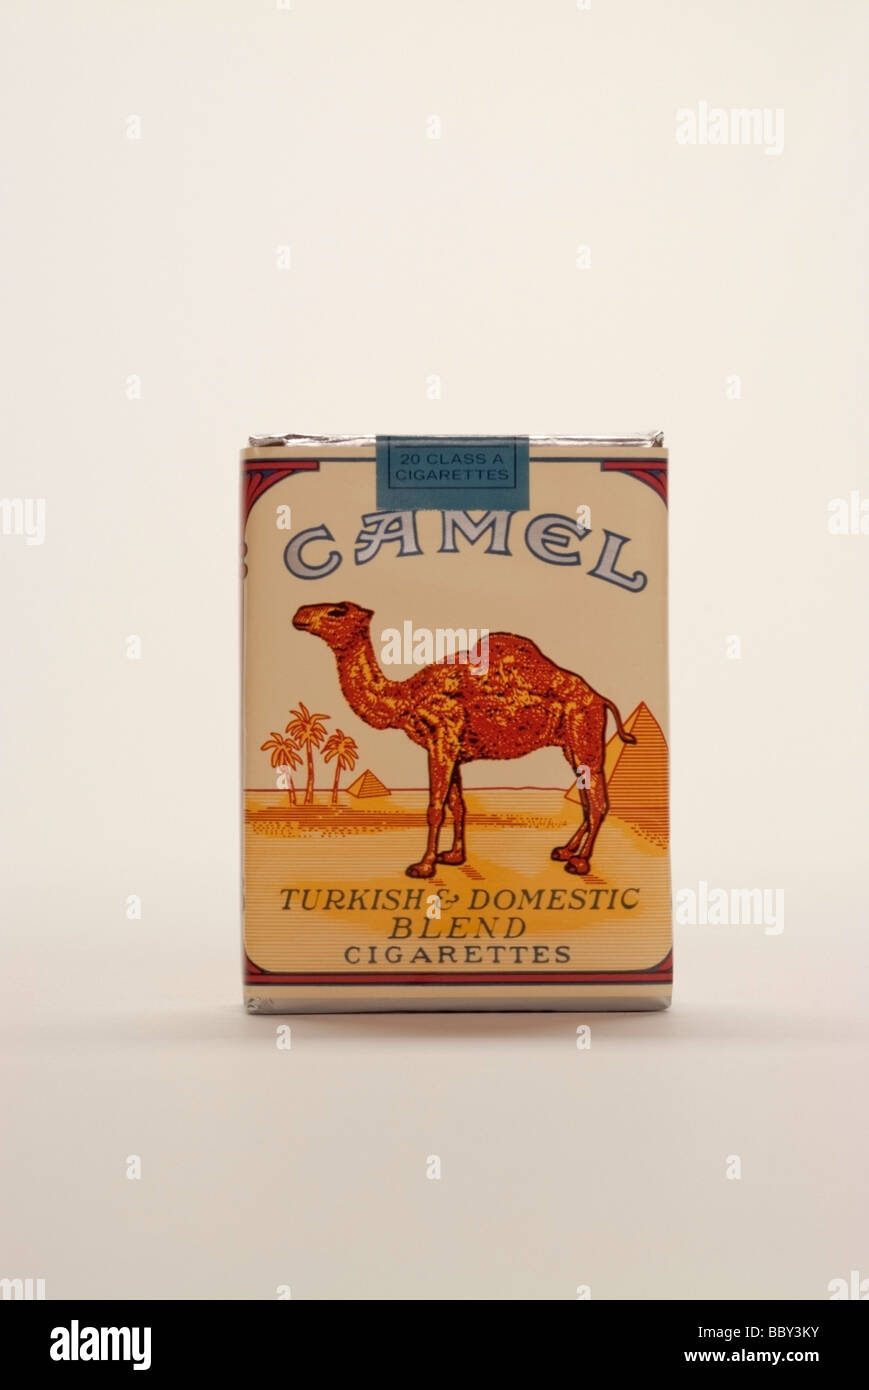 Package of Camel Cigarettes. Camel's are one of the top five selling cigarettes in the United States. Stock Photo